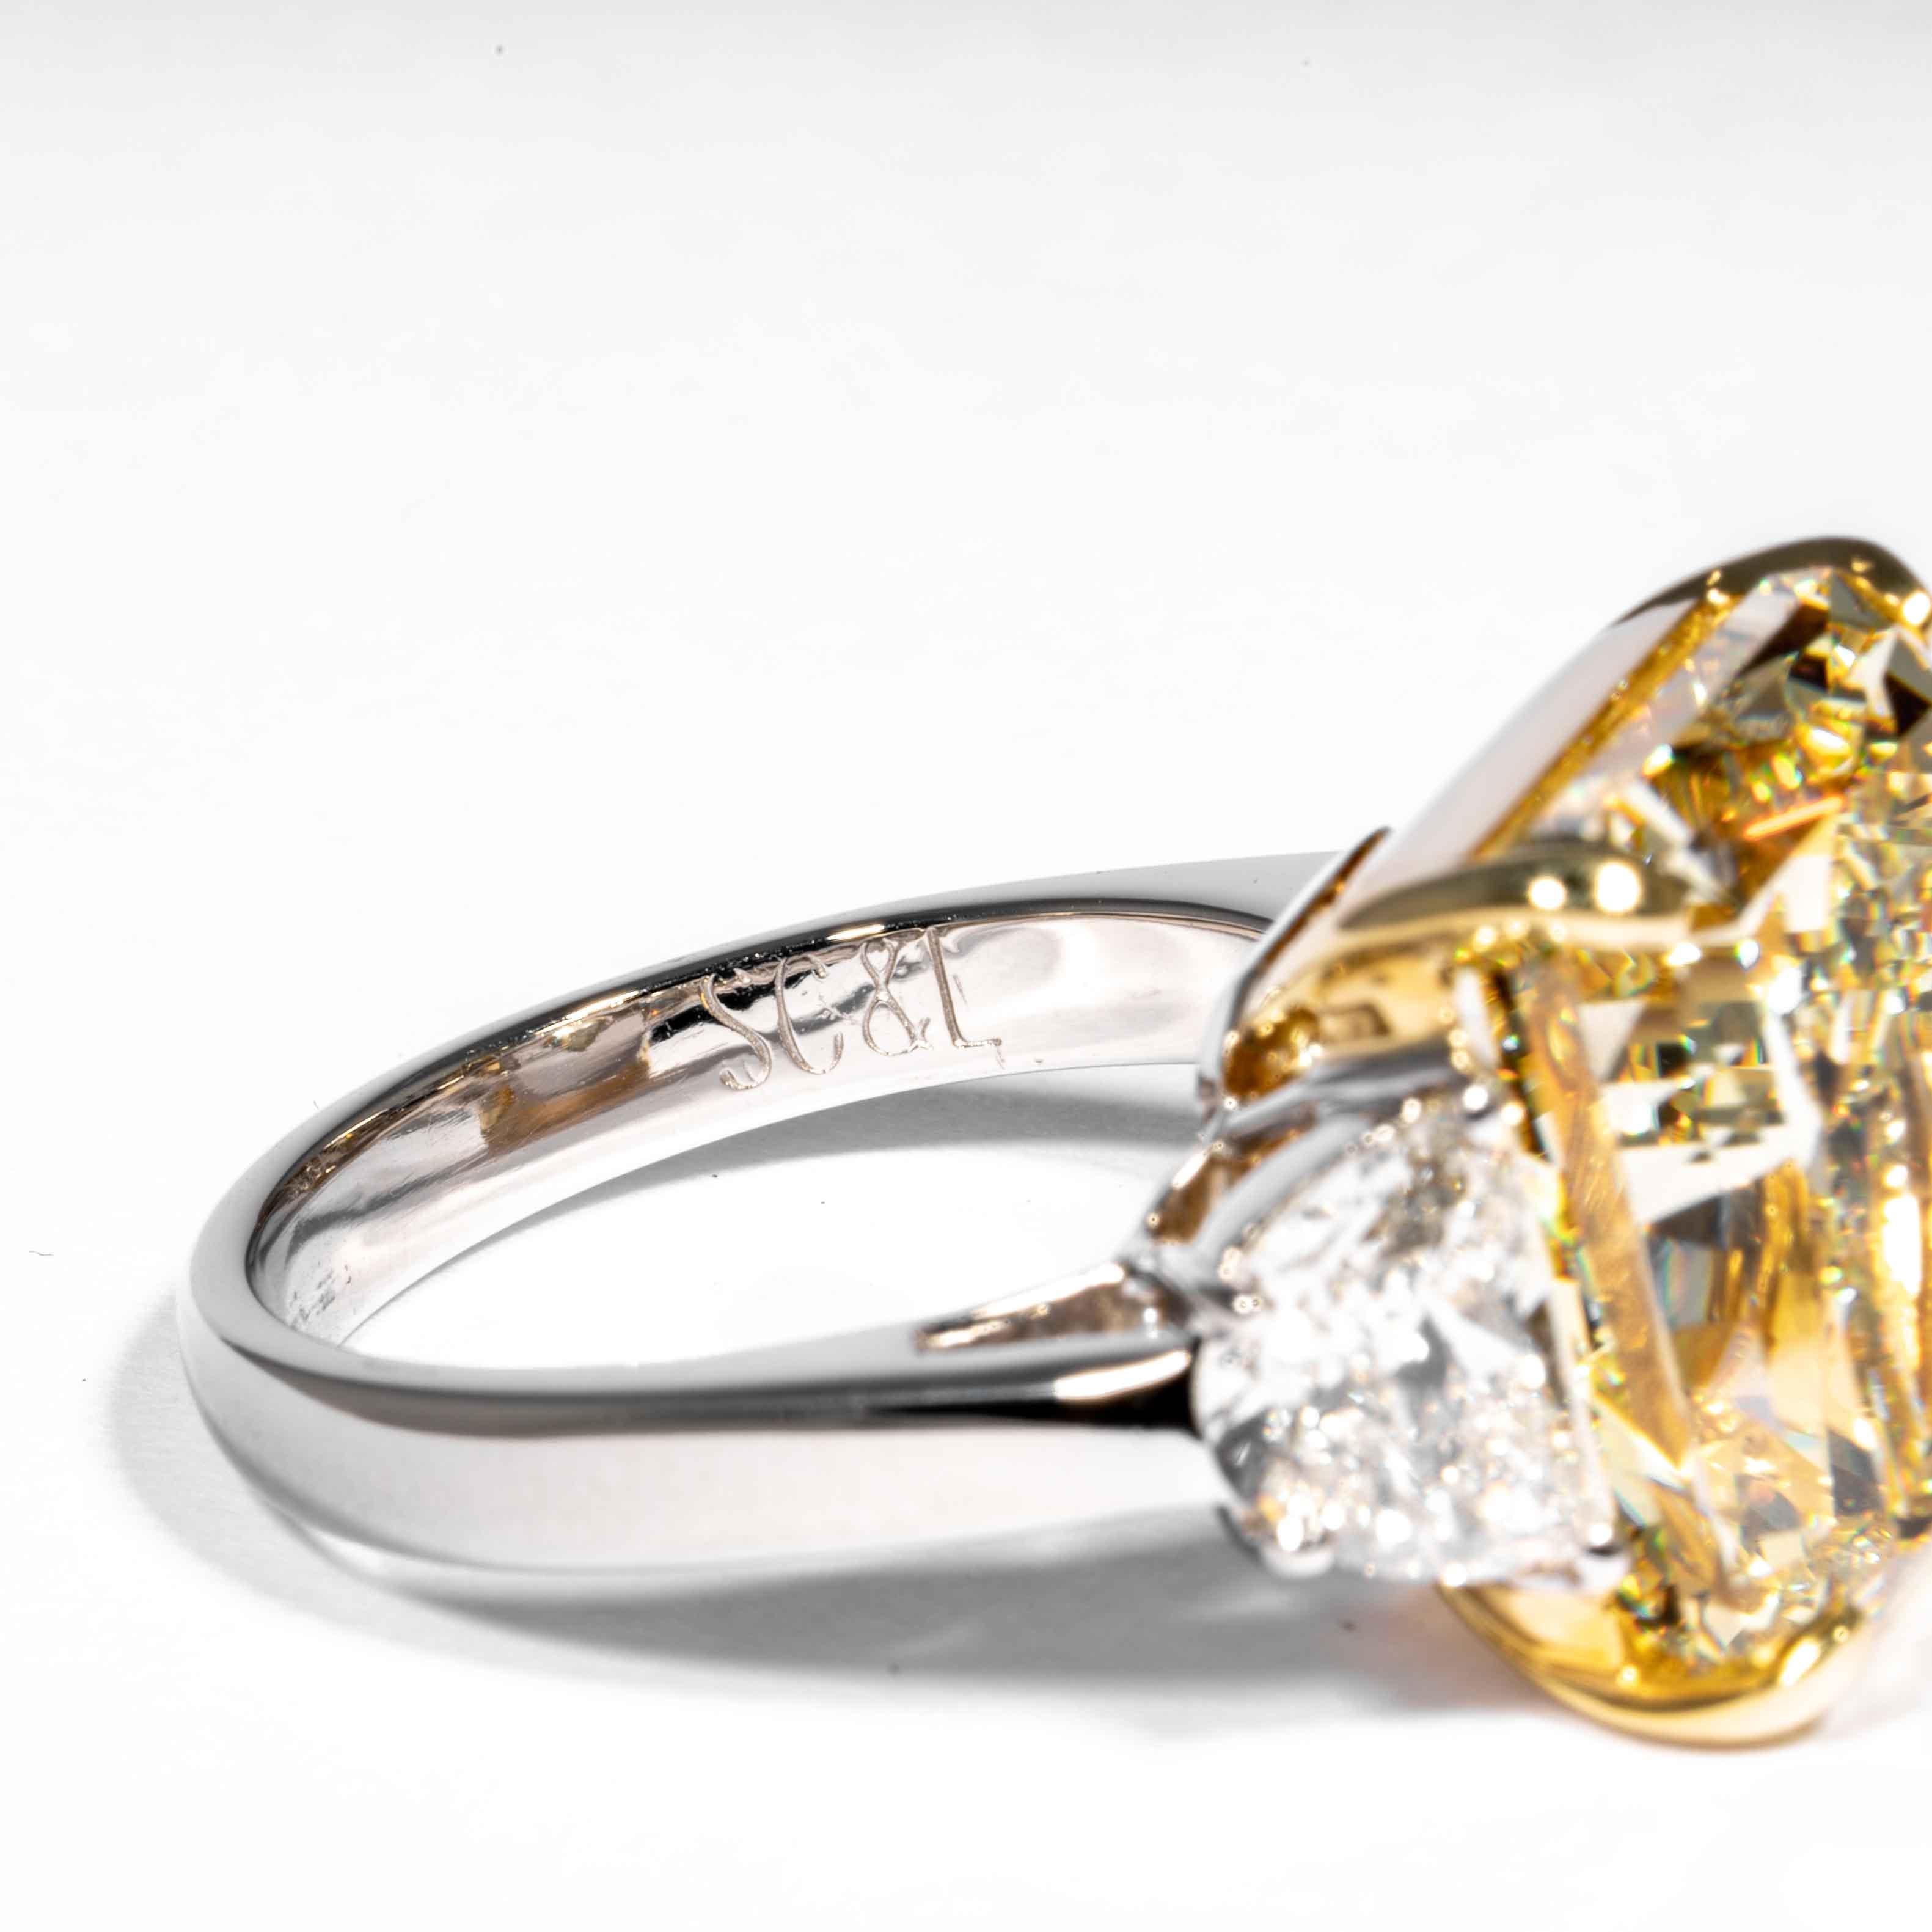 Shreve, Crump & Low GIA Certified 14.63 Carat Fancy Yellow Radiant Diamond Ring For Sale 2